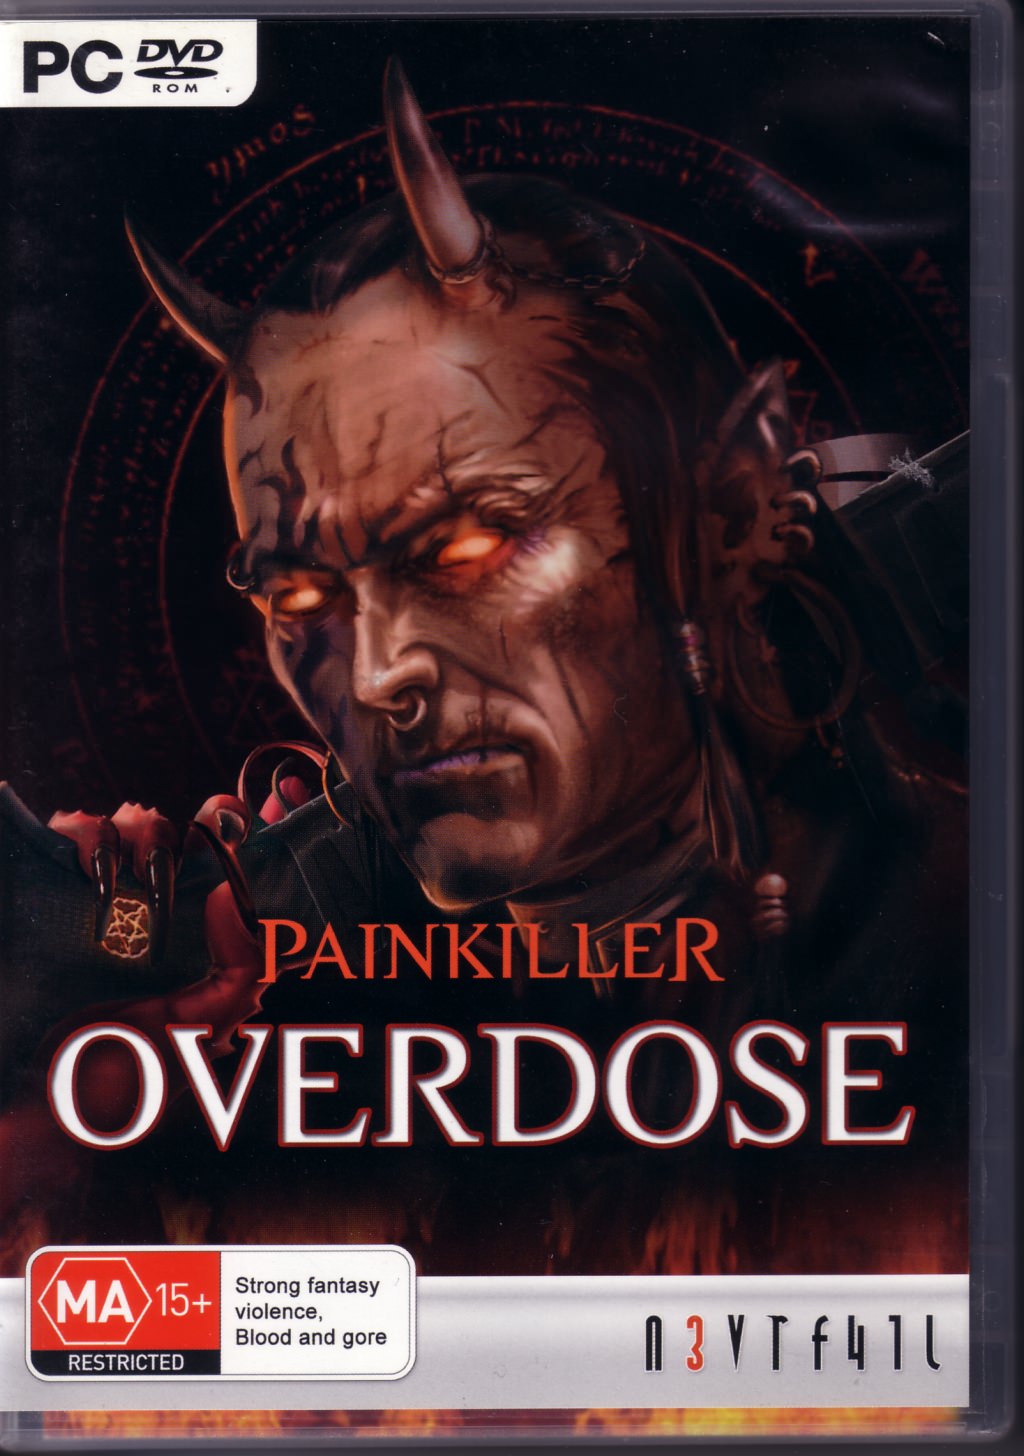 http://www.file-extensions.org/imgs/app-picture/3916/painkiller-overdose.jpg